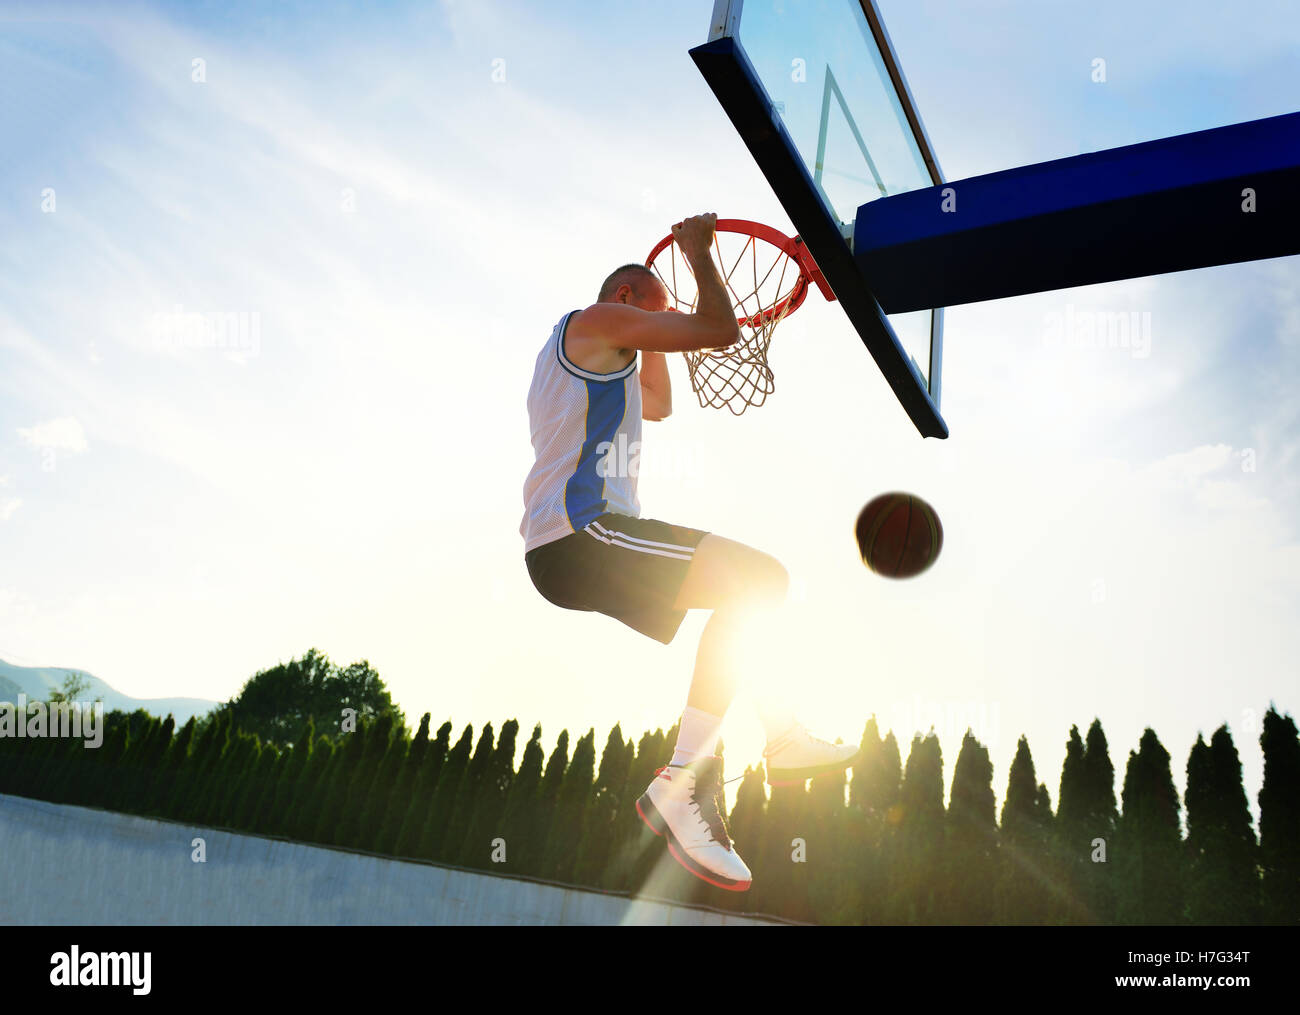 Young basketball player drives to the hoop for a high flying slam dunk Stock Photo